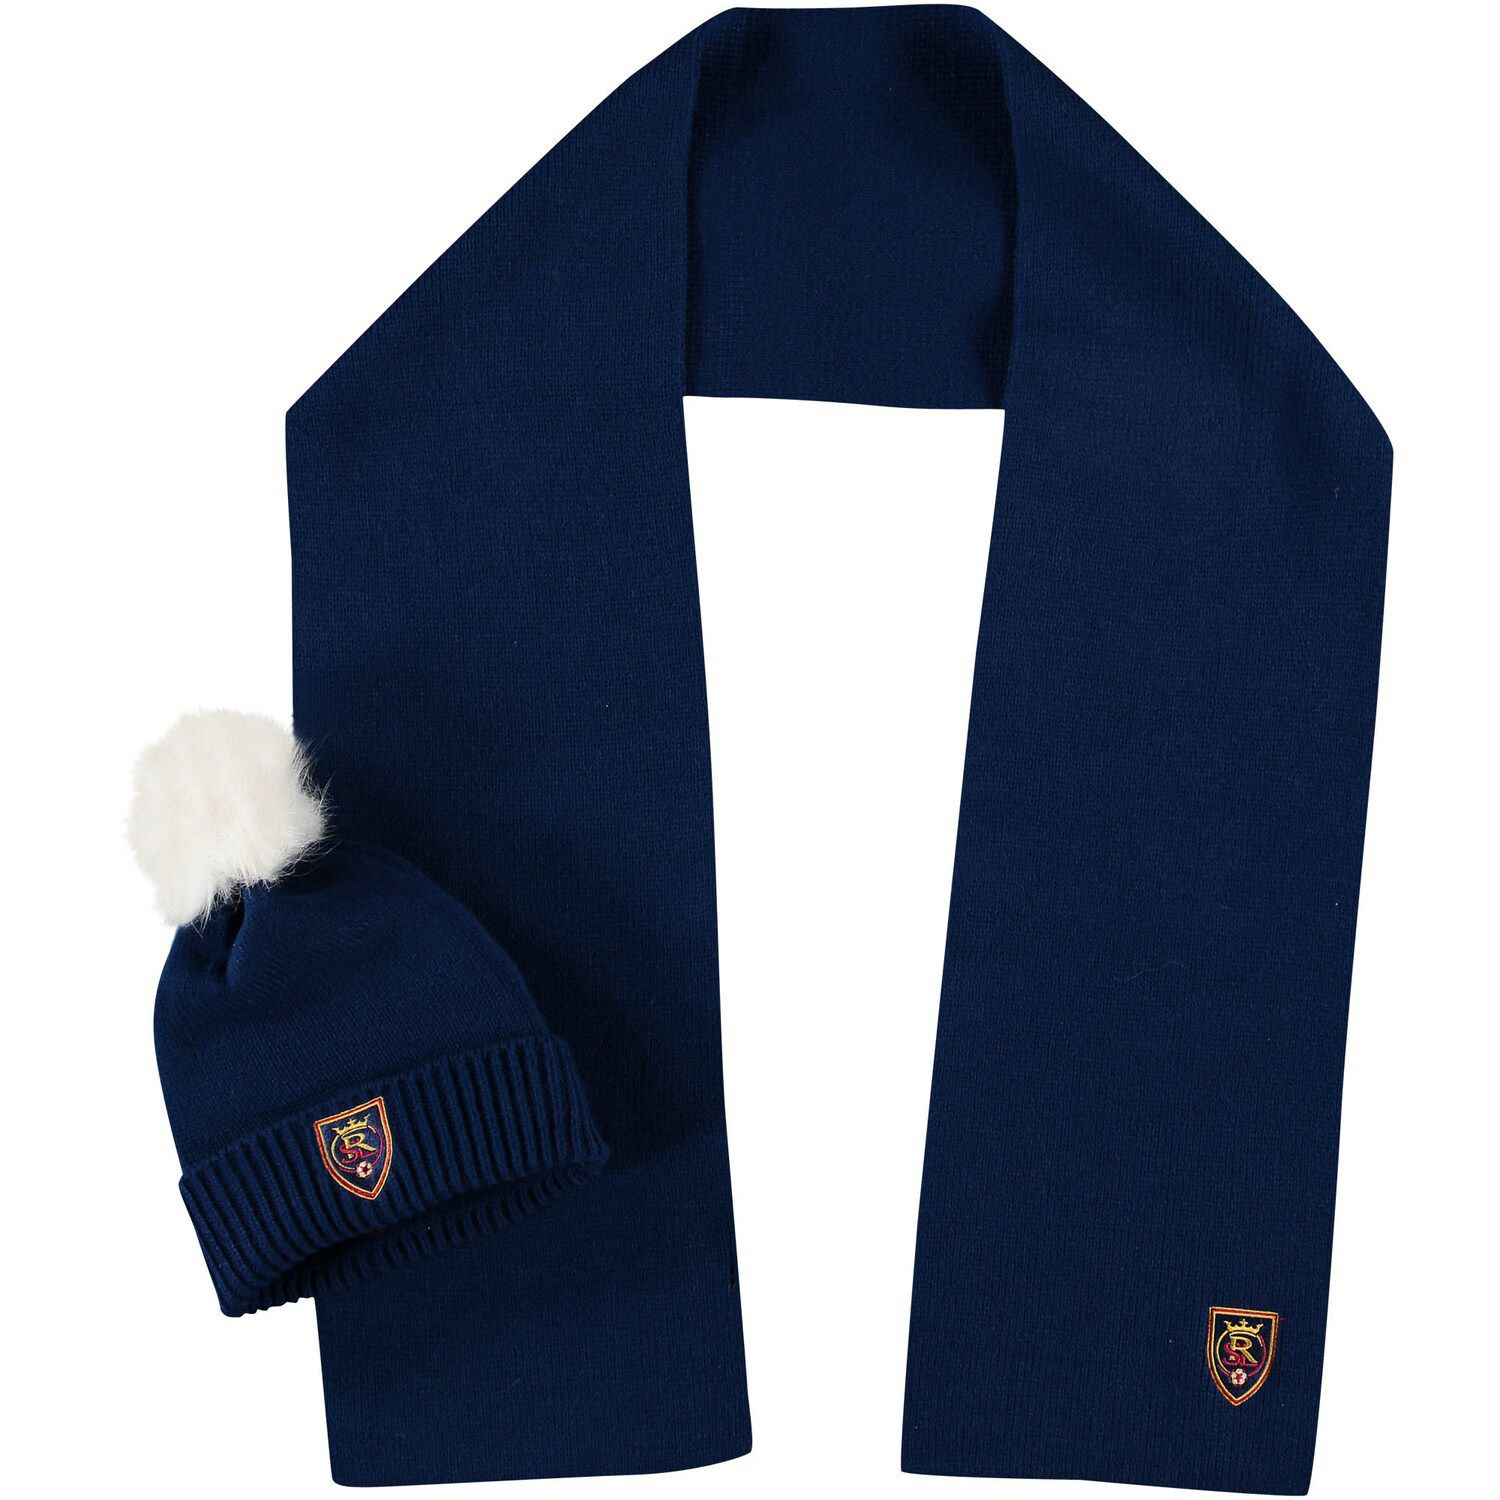 Image for Unbranded ZooZatz Real Salt Lake Fuzzy Cuffed Pom Knit Hat and Scarf Set at Kohl's.